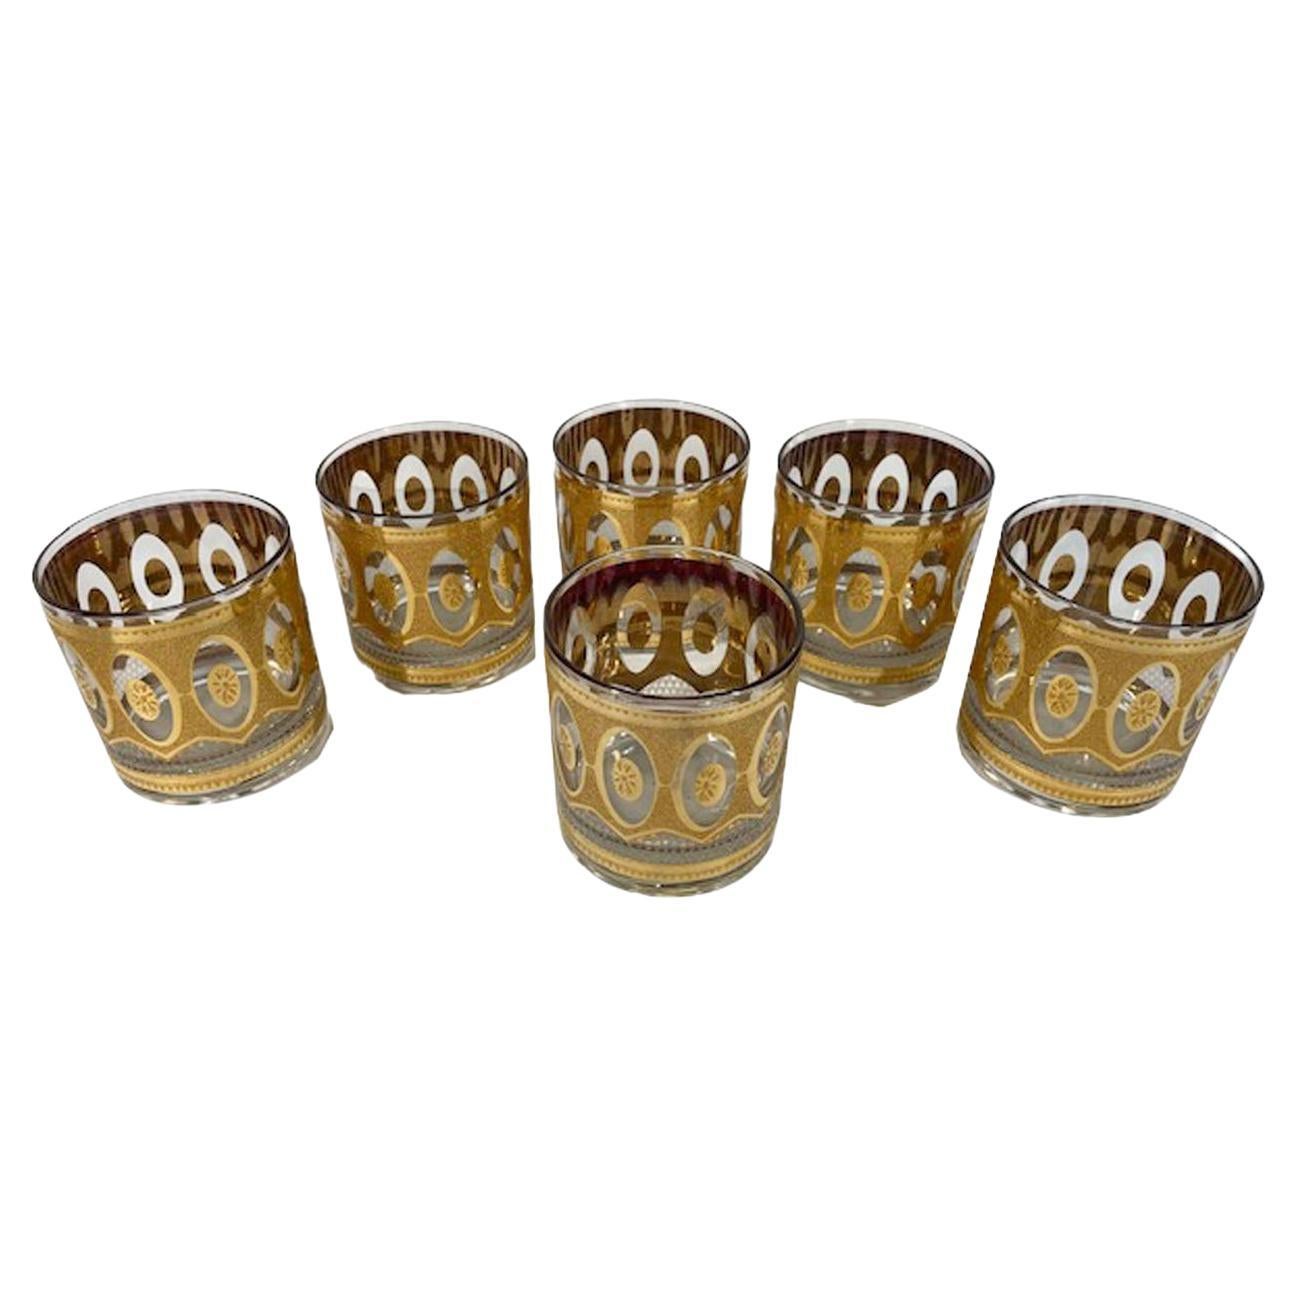 Set of 6 Mid-Century Modern Rocks Glasses by Culver in the Recency Pattern For Sale